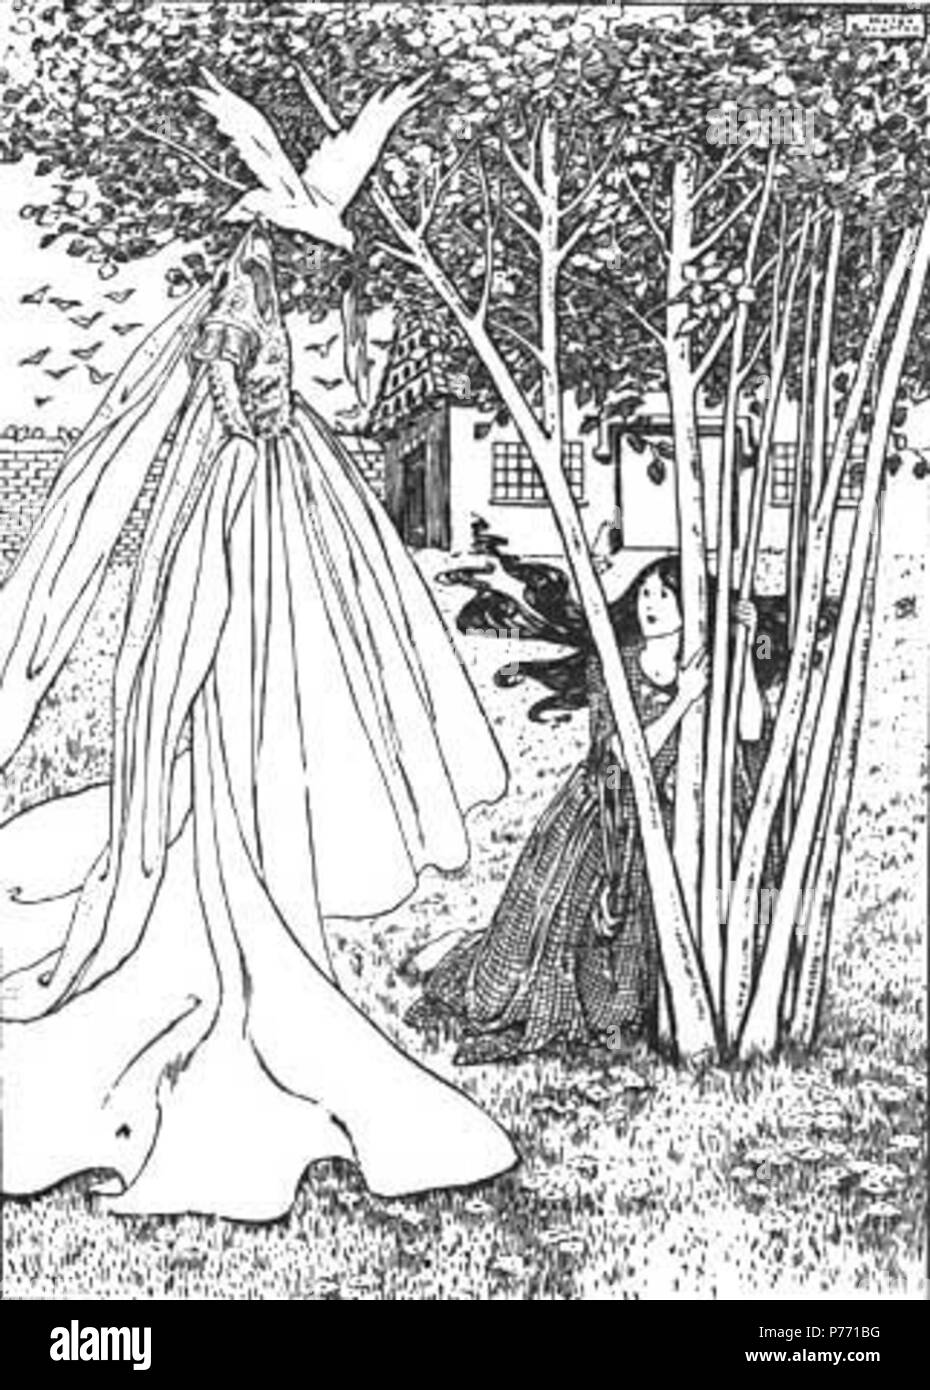 English: From a 1903 edition of Grimms' Fairy Tales, depicting a scene from the 'Cinderella' fairytale, in which a bird gives the titular character a beautiful ball gown. 1903 1 Helen Stratton Cinderella Stock Photo